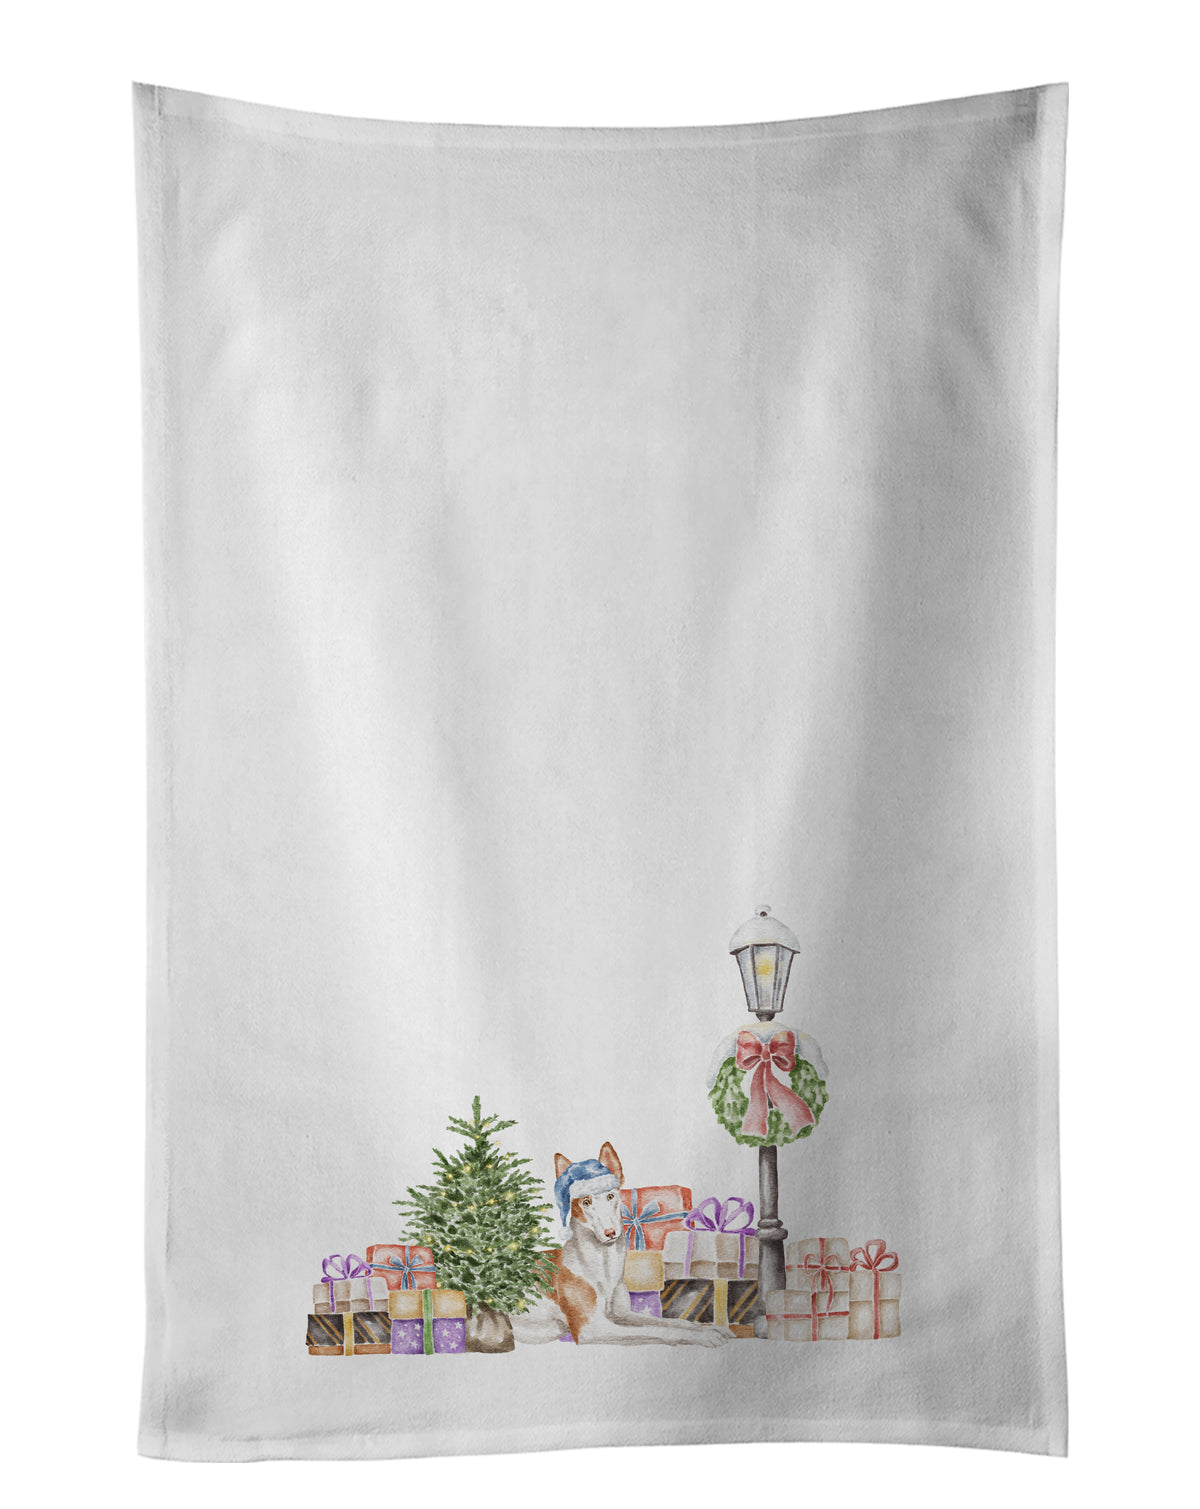 Buy this Ibizan Hound Relaxing with Christmas Wonderland White Kitchen Towel Set of 2